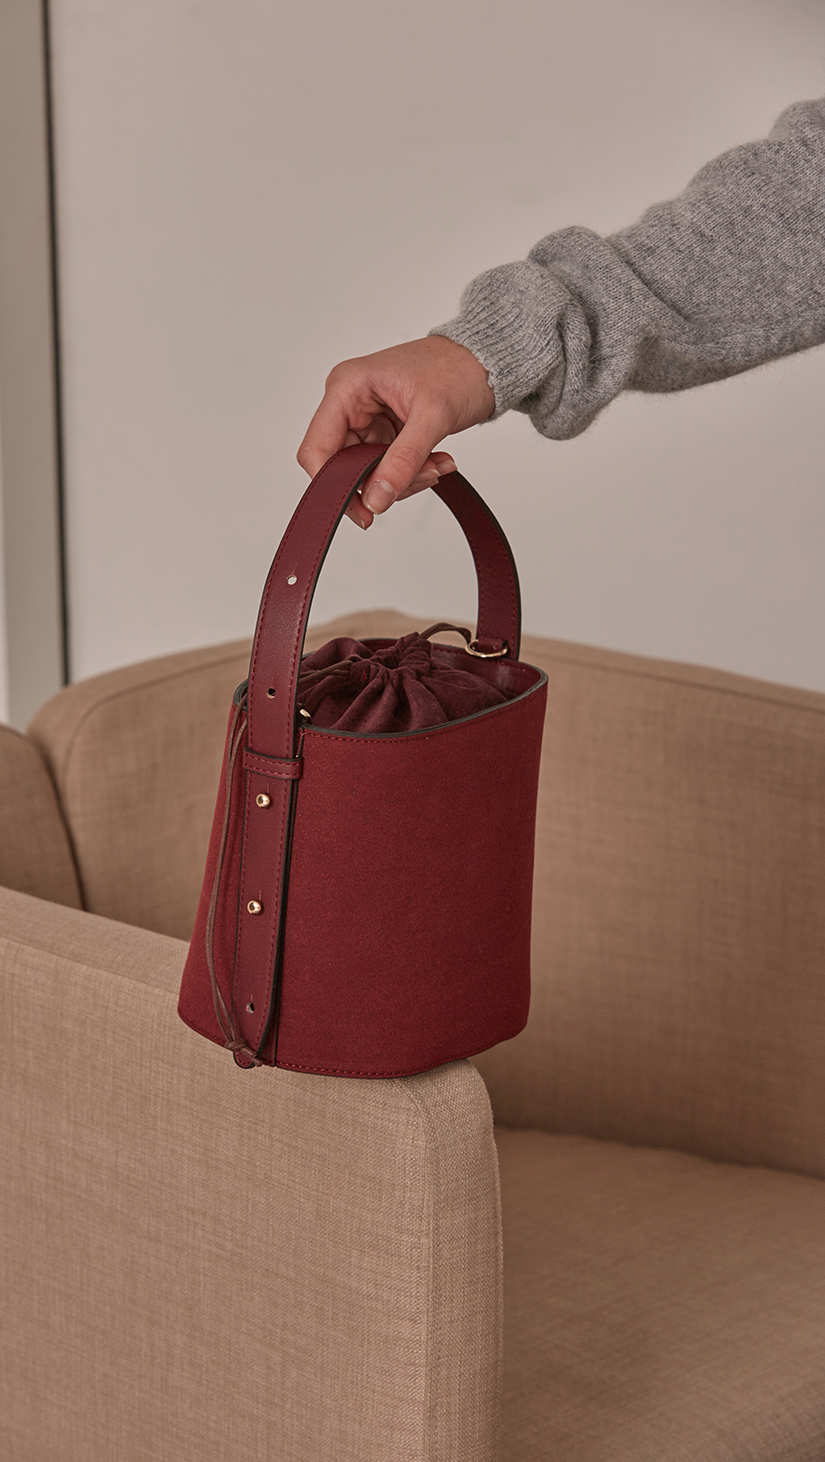 Seed Bucket bag in Burgundy. Main compartment with adjustable strap, detachable shoulder strap, interior pocket with zipper compartment. Structured bottom.